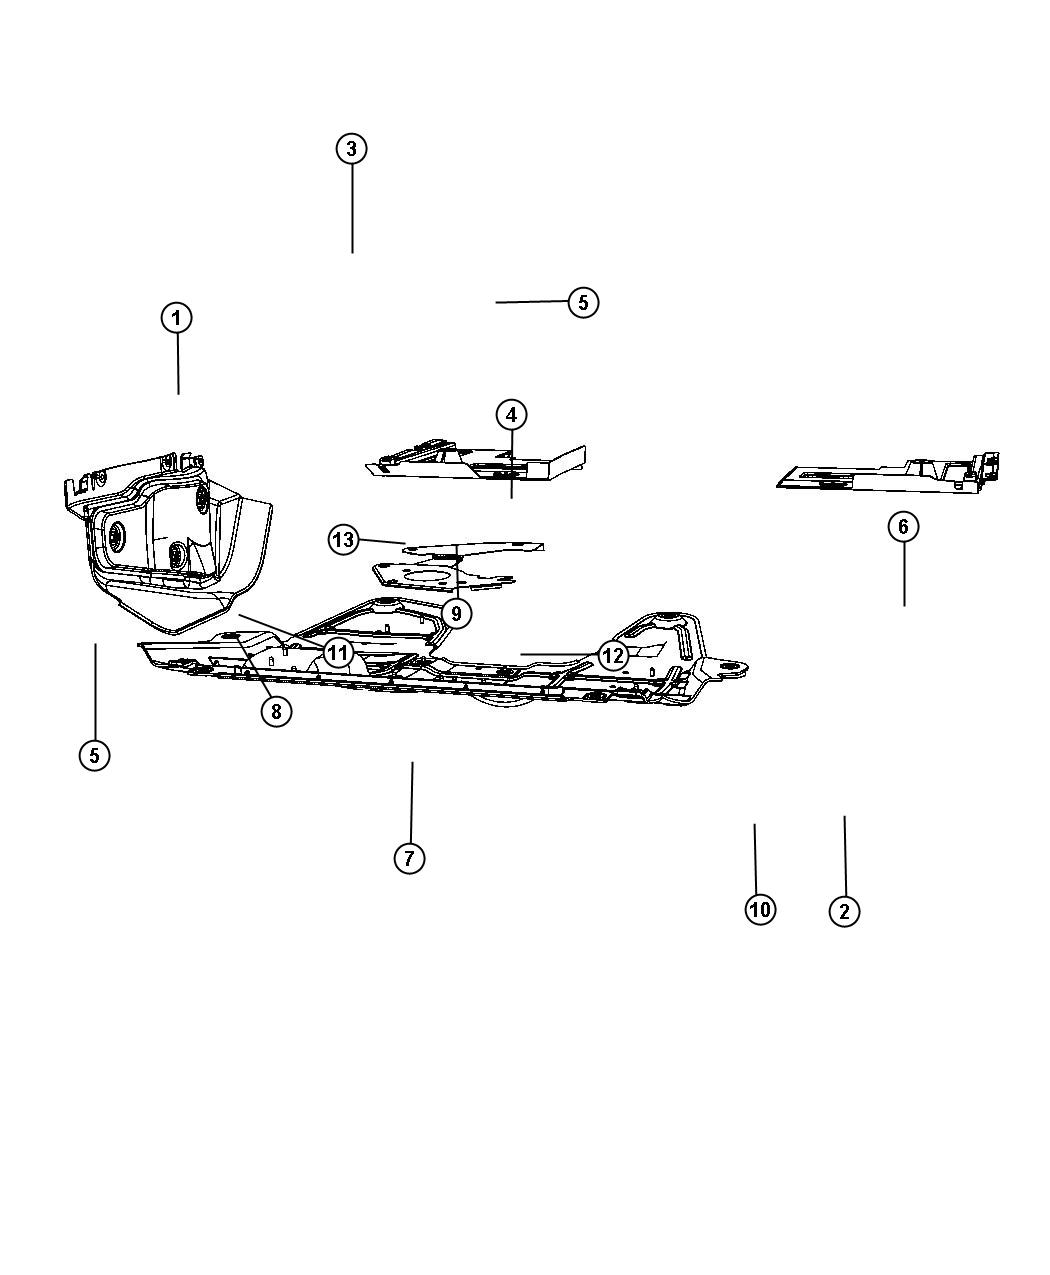 Underbody Plates And Shields. Diagram